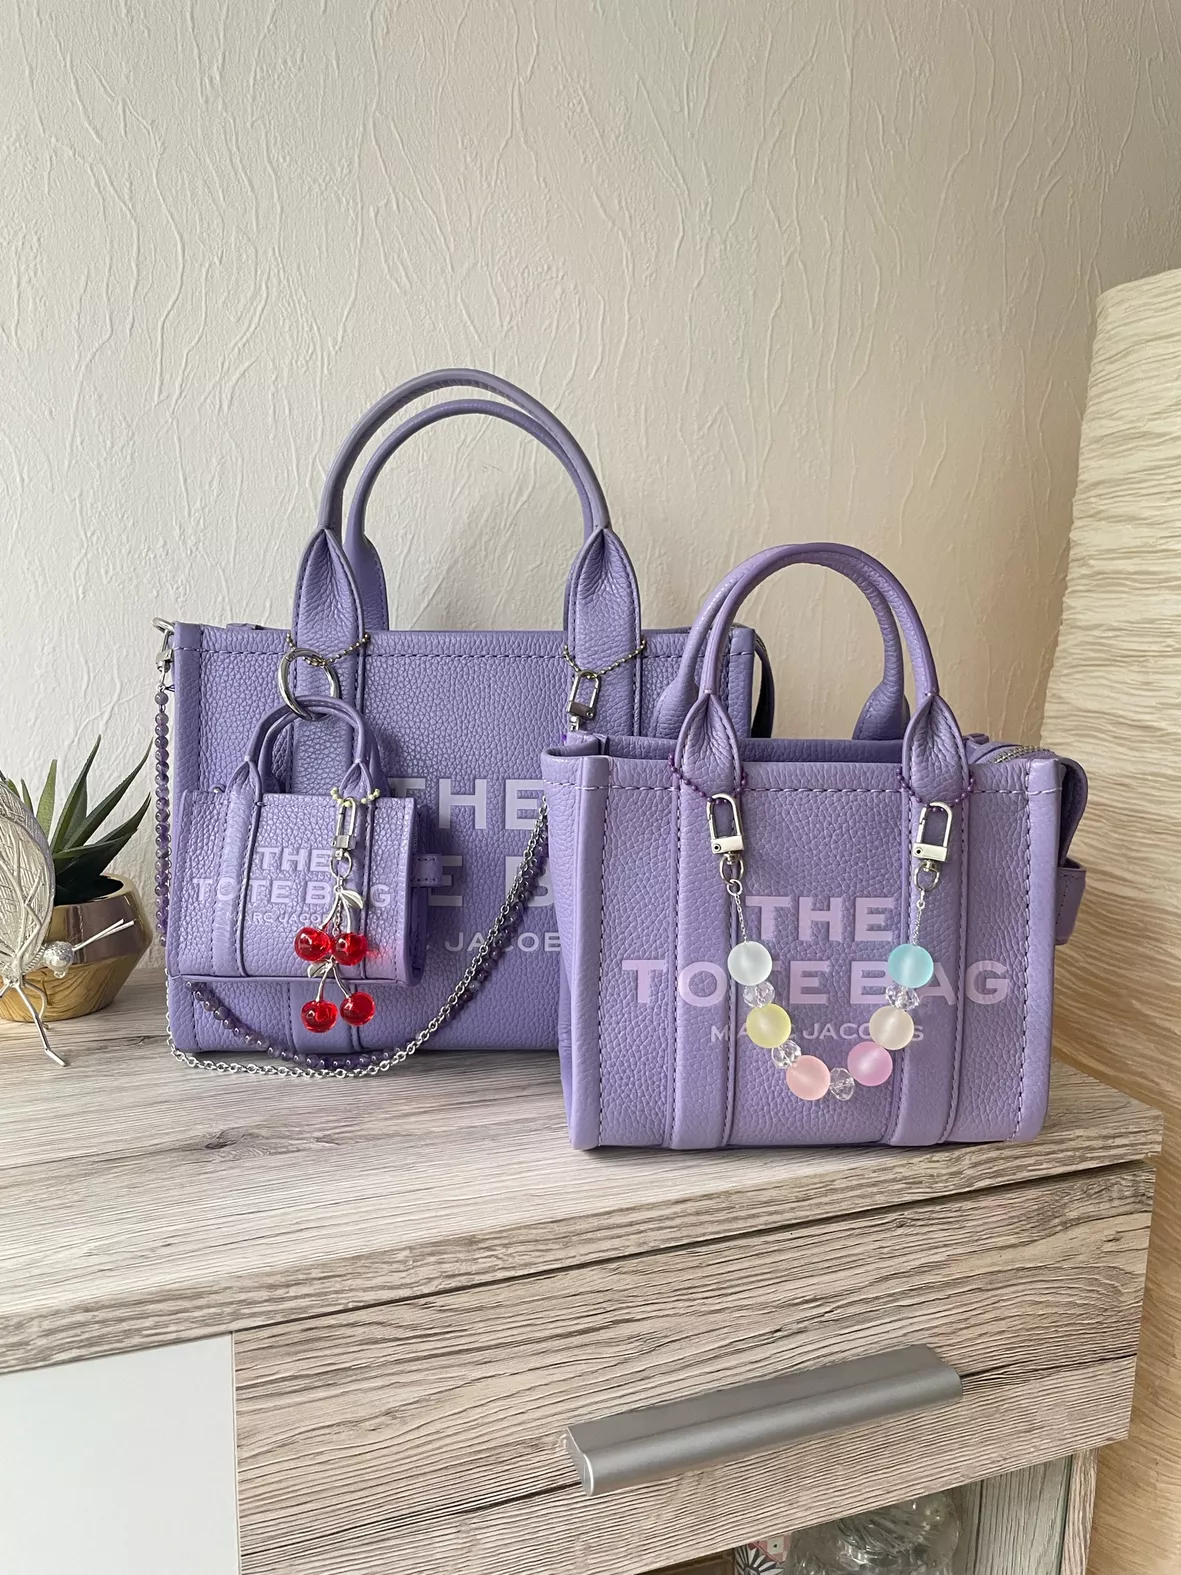 MARC JACOBS MICRO LEATHER TOTE BAG VS MINI LEATHER TOTE BAG IN